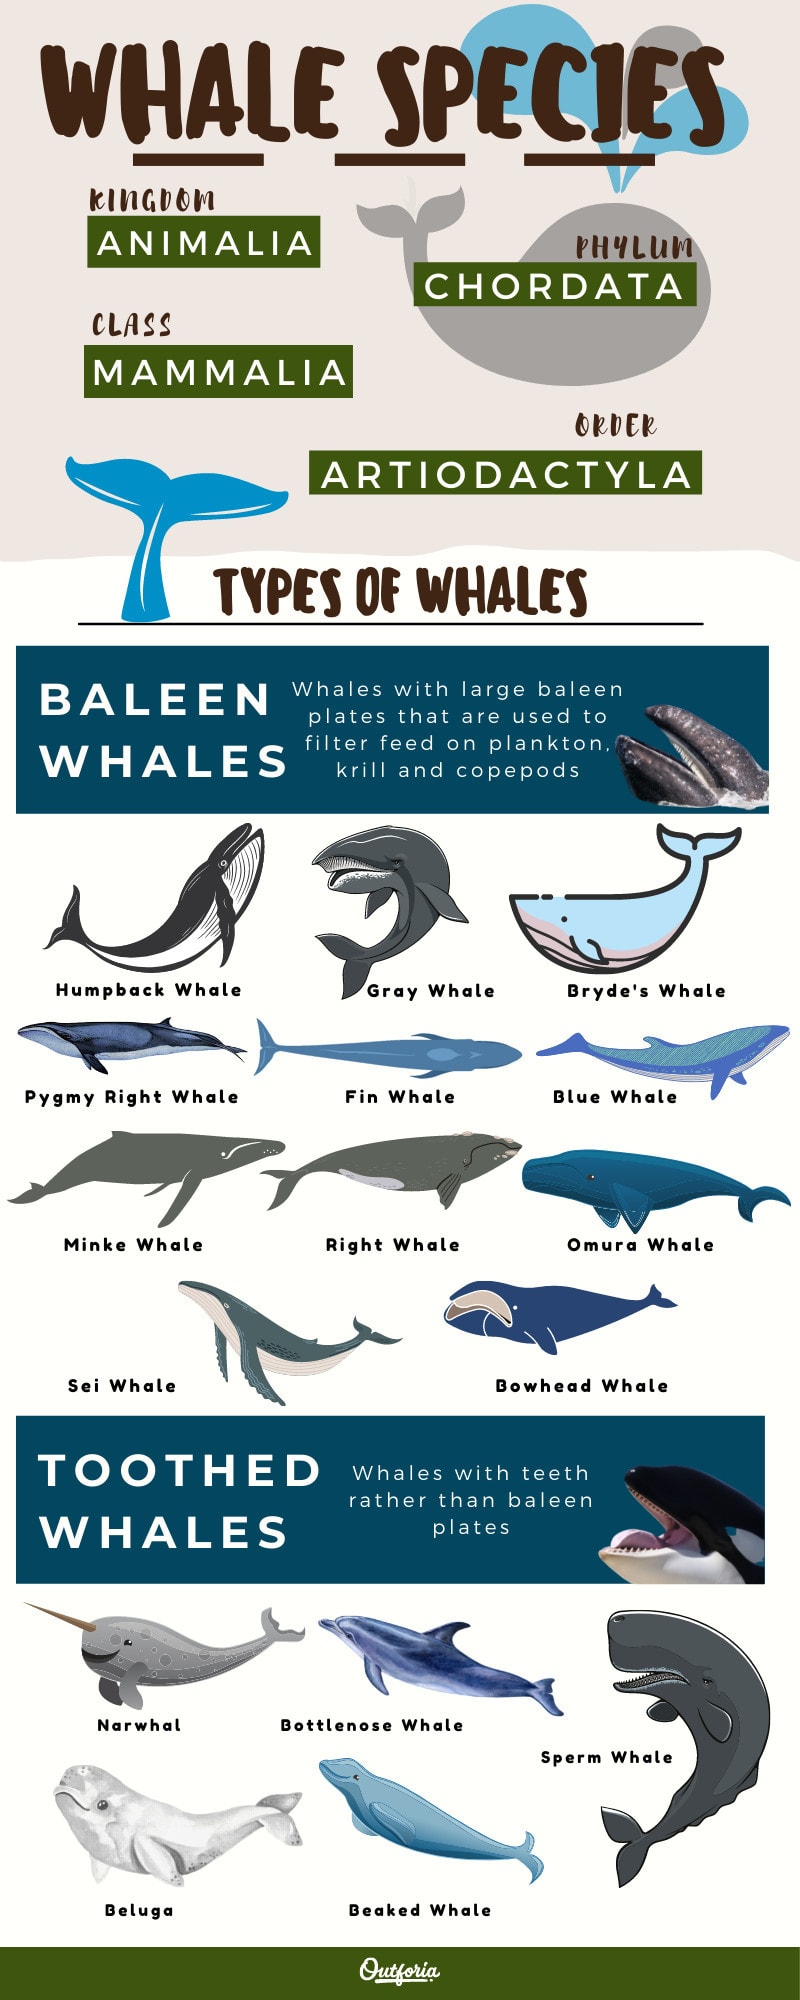 Types of whales infographic